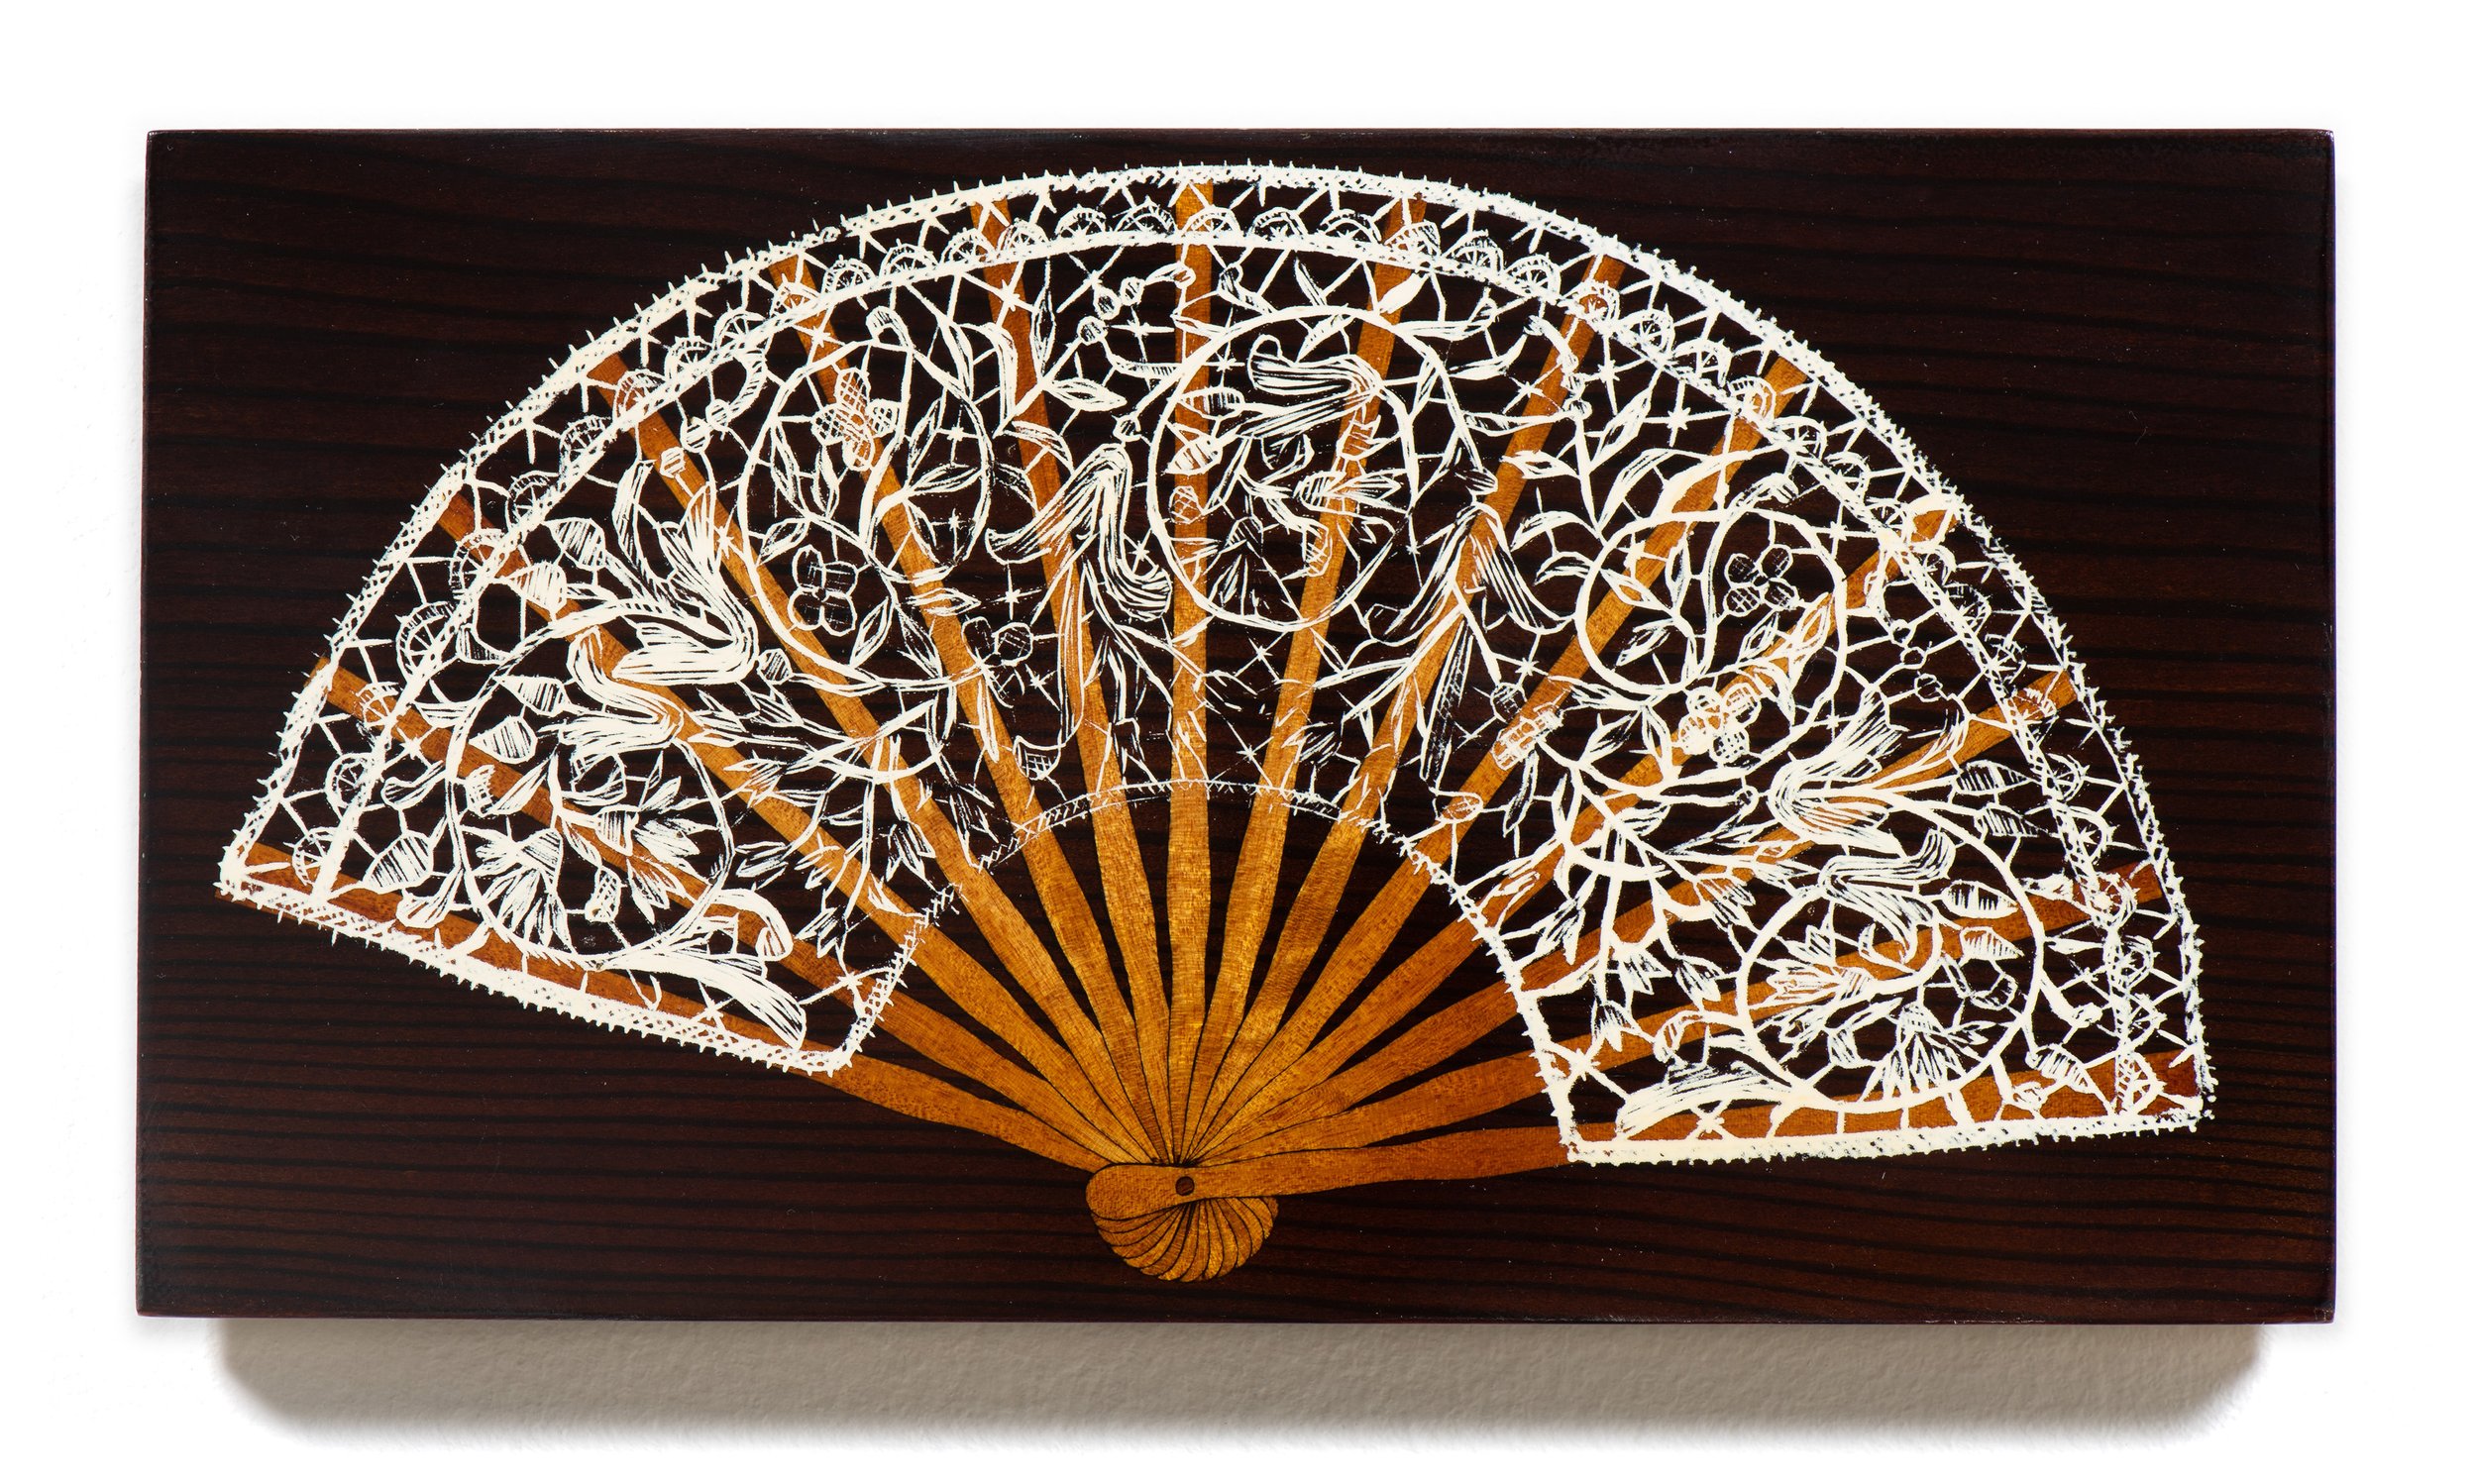   Burano Fan , 2021  Shellac and wood  4 1/2 x 8 1/4 x 1/2 inches 